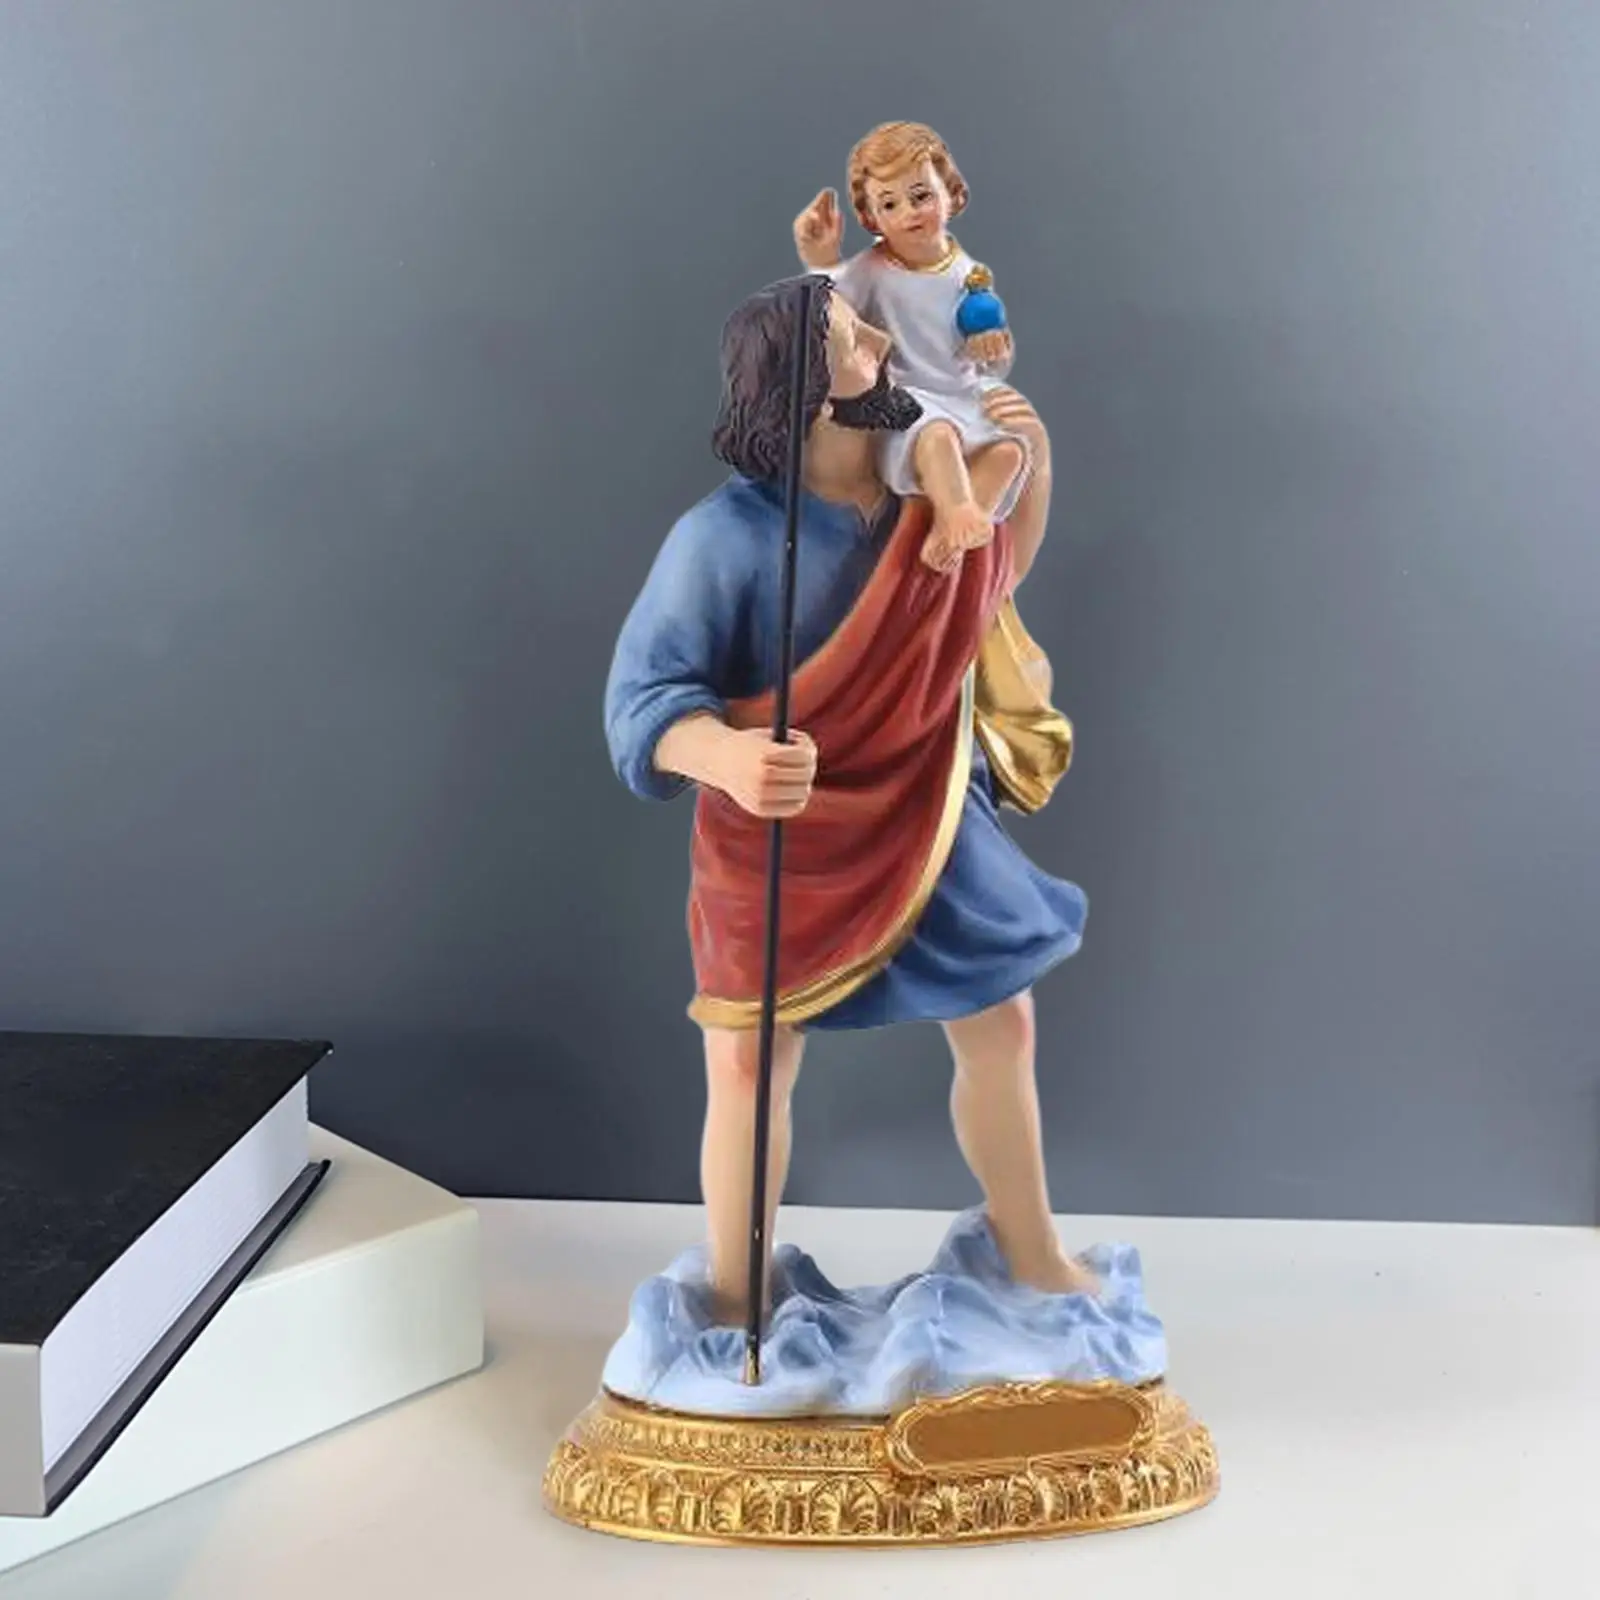 Resin Statue Religious Decor Statues Sculpture Church Ornament for Desktop Living Room Bedroom Office Collection